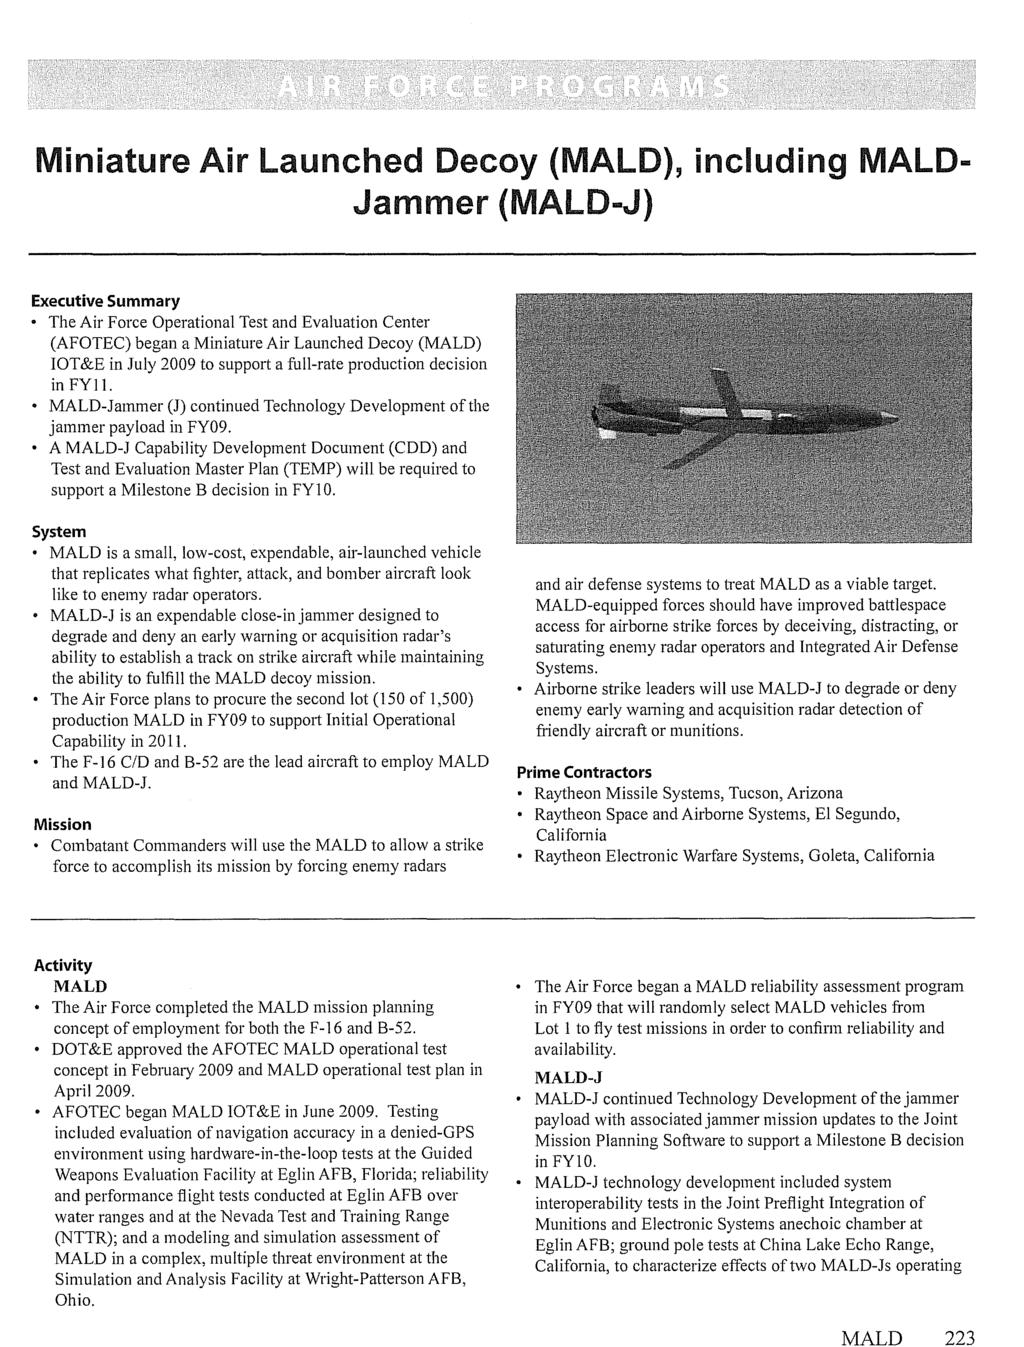 MALD 223 Miniature Air Launched Decoy (MALD), including MALD- Jammer (MALD-J) Executive Summary The Air Force Operational Test and Evaluation Center (AFOTEC) began a Miniature Air Launched Decoy